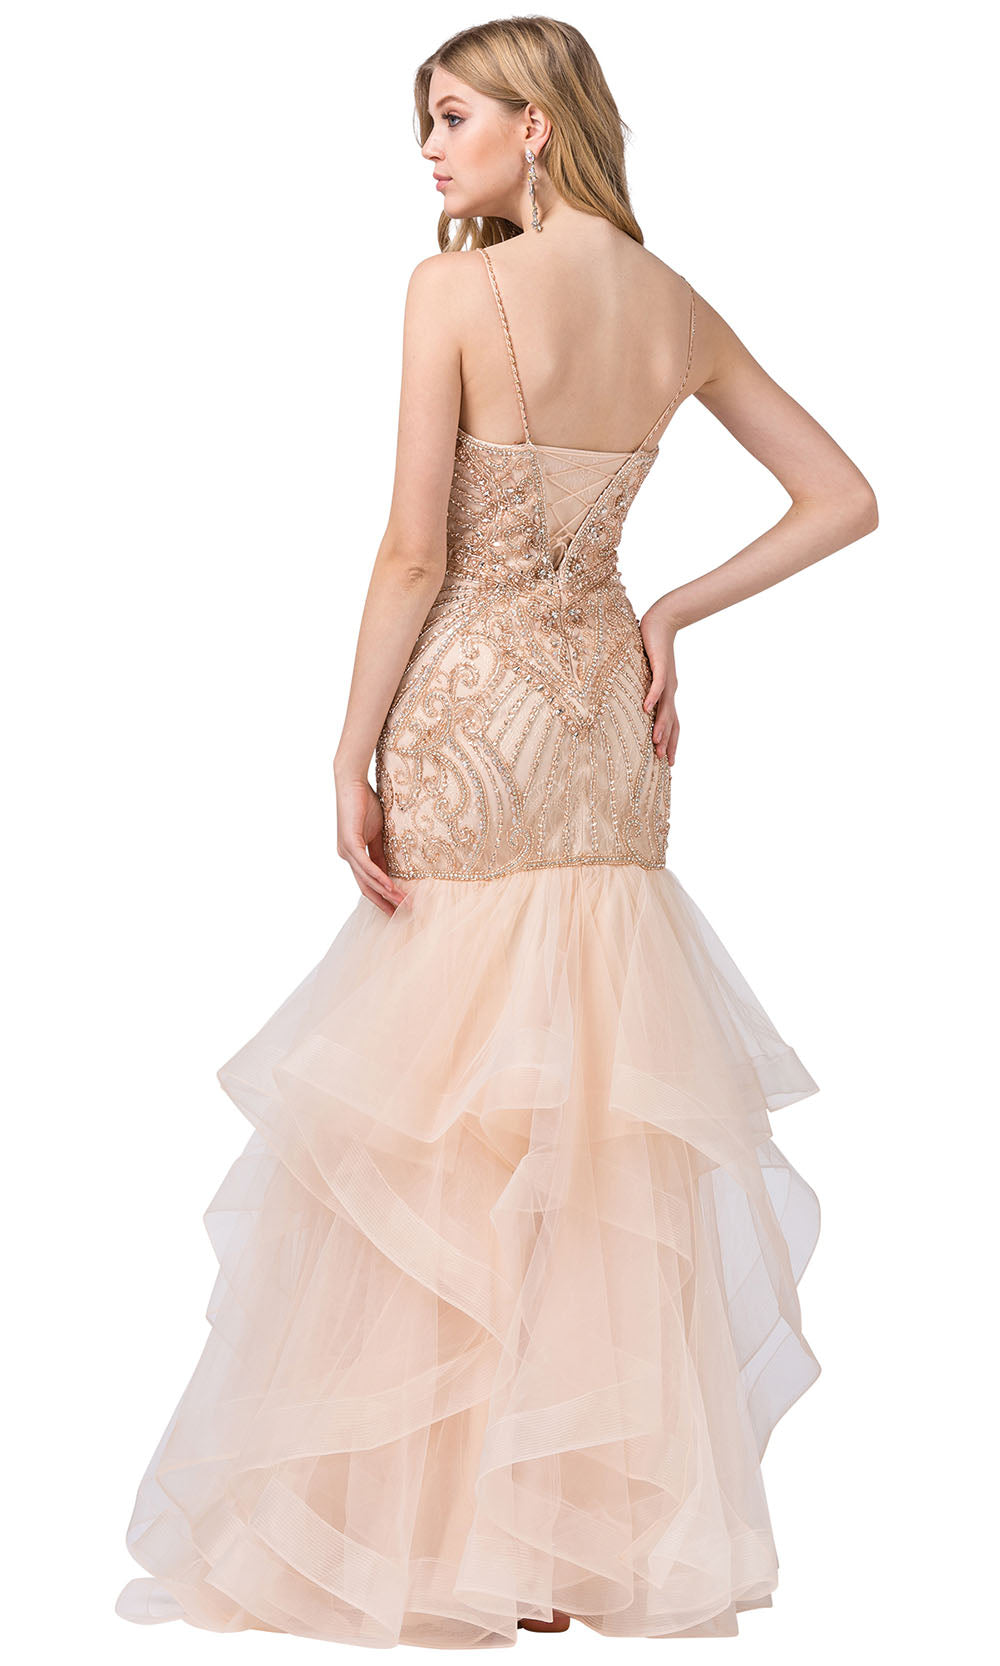 Dancing Queen - 2523 Jeweled Sheer Flared Trumpet Dress In Champagne & Gold